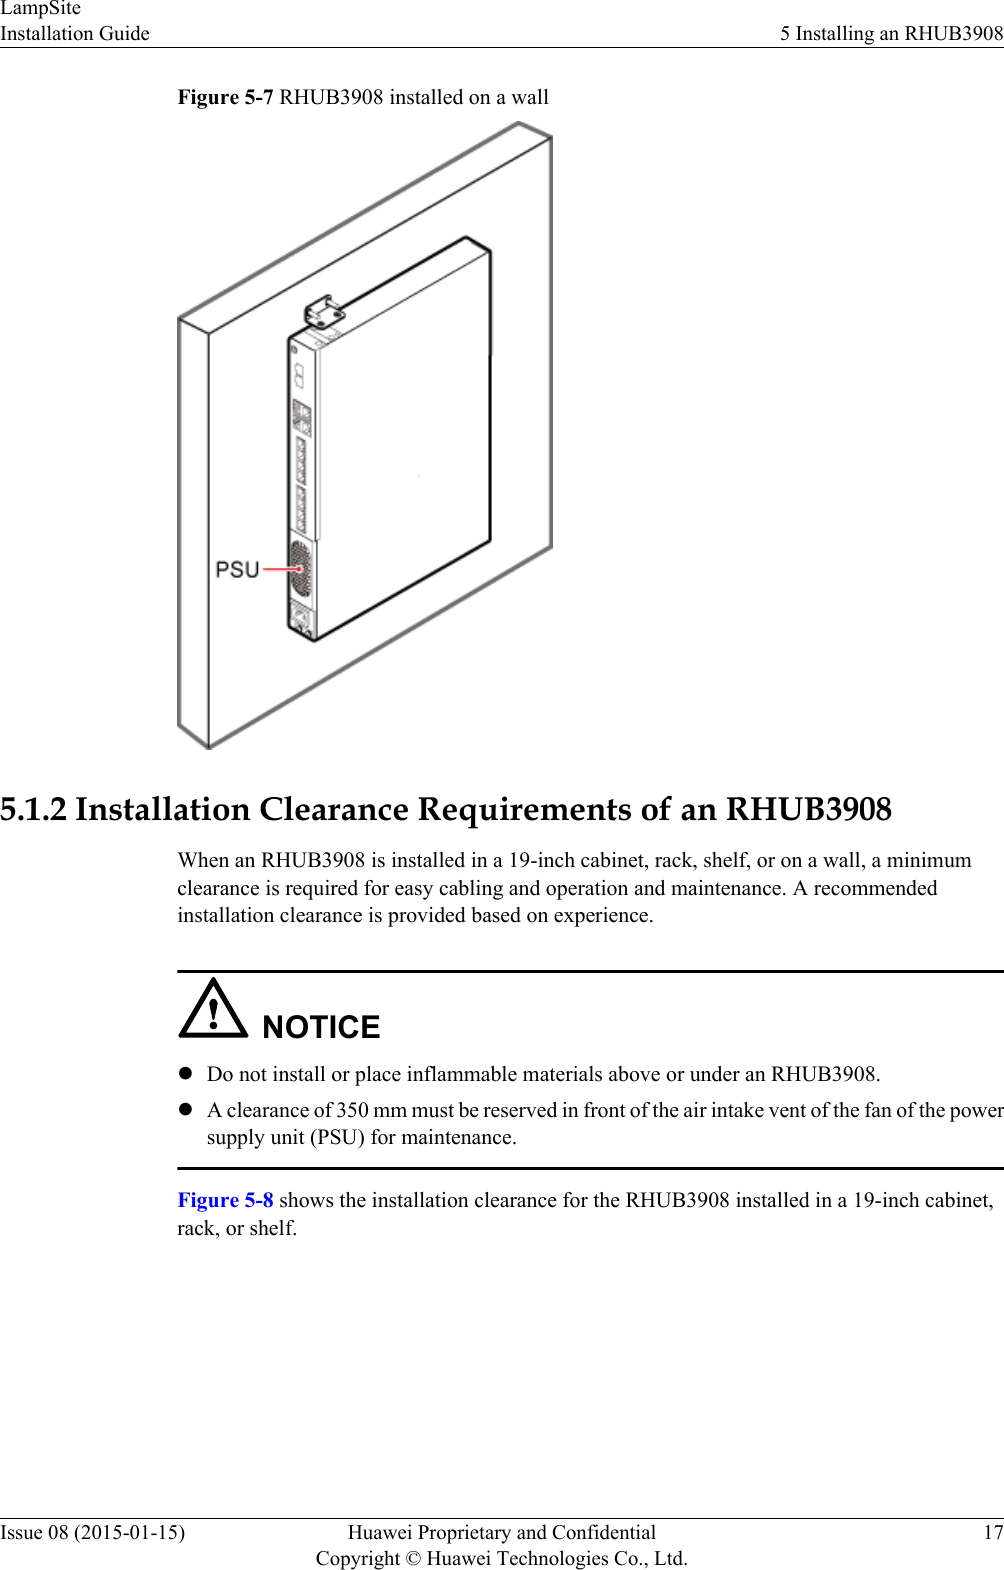 Figure 5-7 RHUB3908 installed on a wall5.1.2 Installation Clearance Requirements of an RHUB3908When an RHUB3908 is installed in a 19-inch cabinet, rack, shelf, or on a wall, a minimumclearance is required for easy cabling and operation and maintenance. A recommendedinstallation clearance is provided based on experience.NOTICElDo not install or place inflammable materials above or under an RHUB3908.lA clearance of 350 mm must be reserved in front of the air intake vent of the fan of the powersupply unit (PSU) for maintenance.Figure 5-8 shows the installation clearance for the RHUB3908 installed in a 19-inch cabinet,rack, or shelf.LampSiteInstallation Guide 5 Installing an RHUB3908Issue 08 (2015-01-15) Huawei Proprietary and ConfidentialCopyright © Huawei Technologies Co., Ltd.17